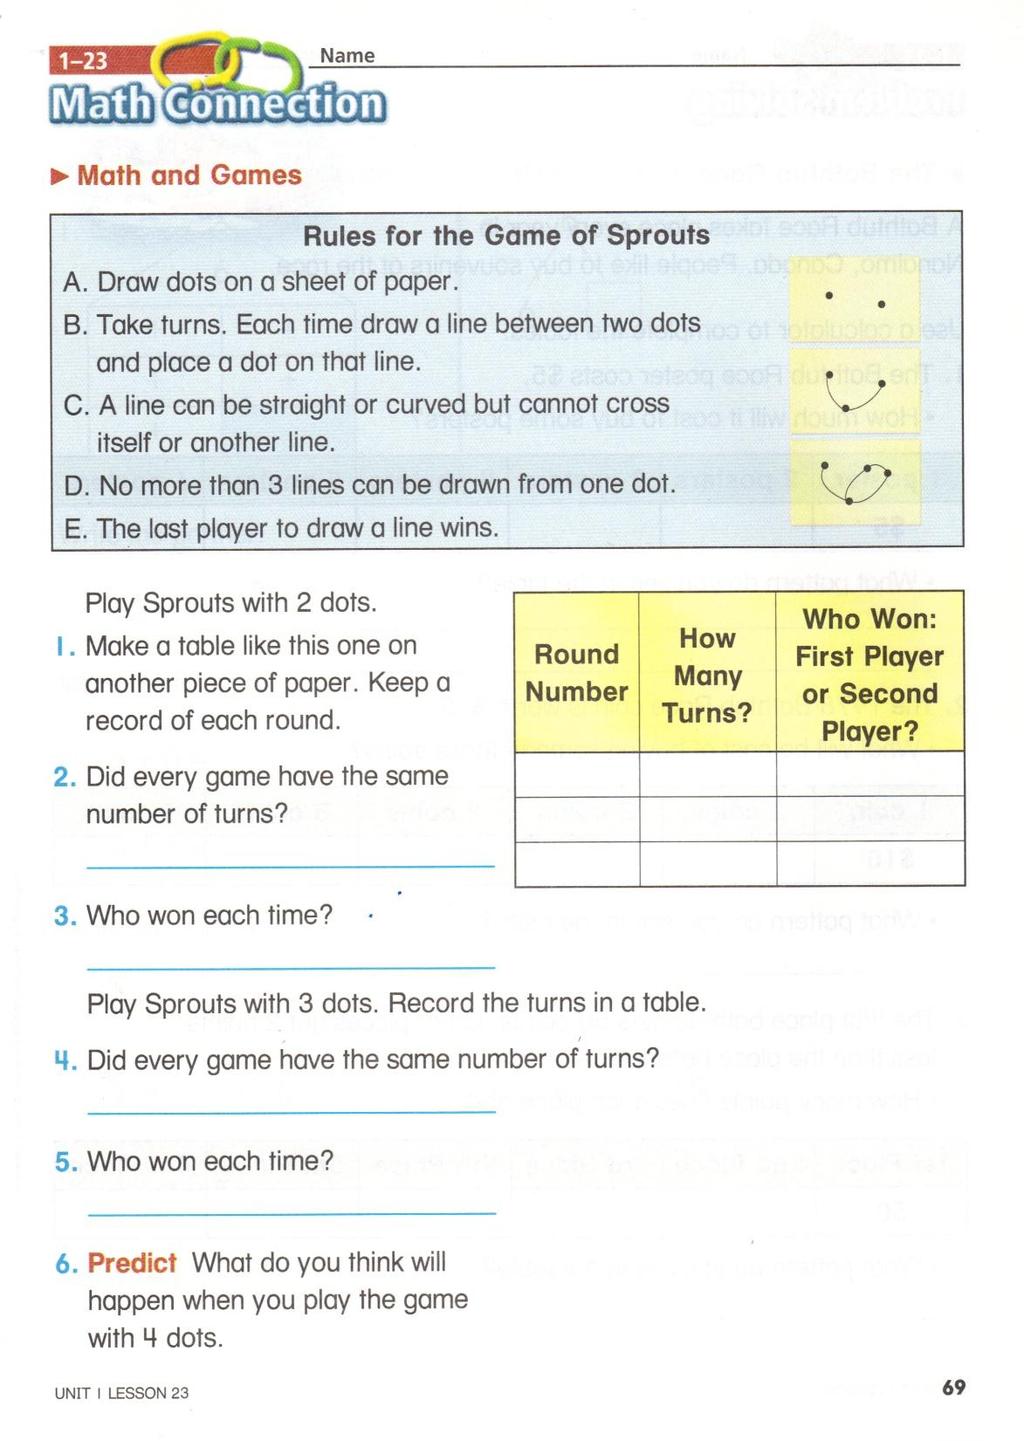 Interactive Lessons: Math Expressions uses a variety of activities to practice concepts.